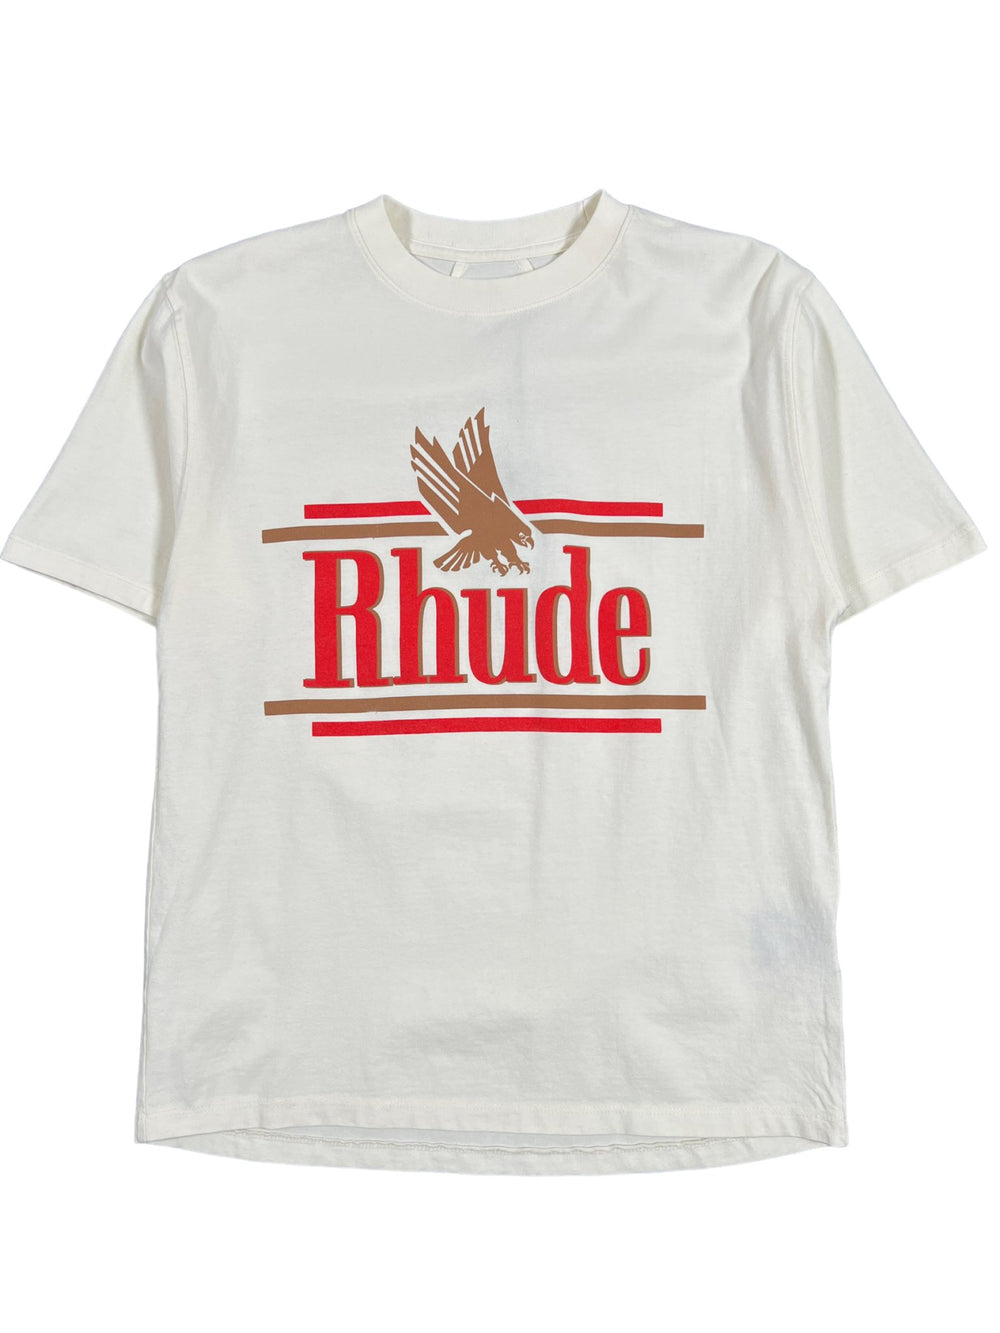 A white cotton t-shirt with the RHUDE ROSSA TEE VTG WHITE on it.